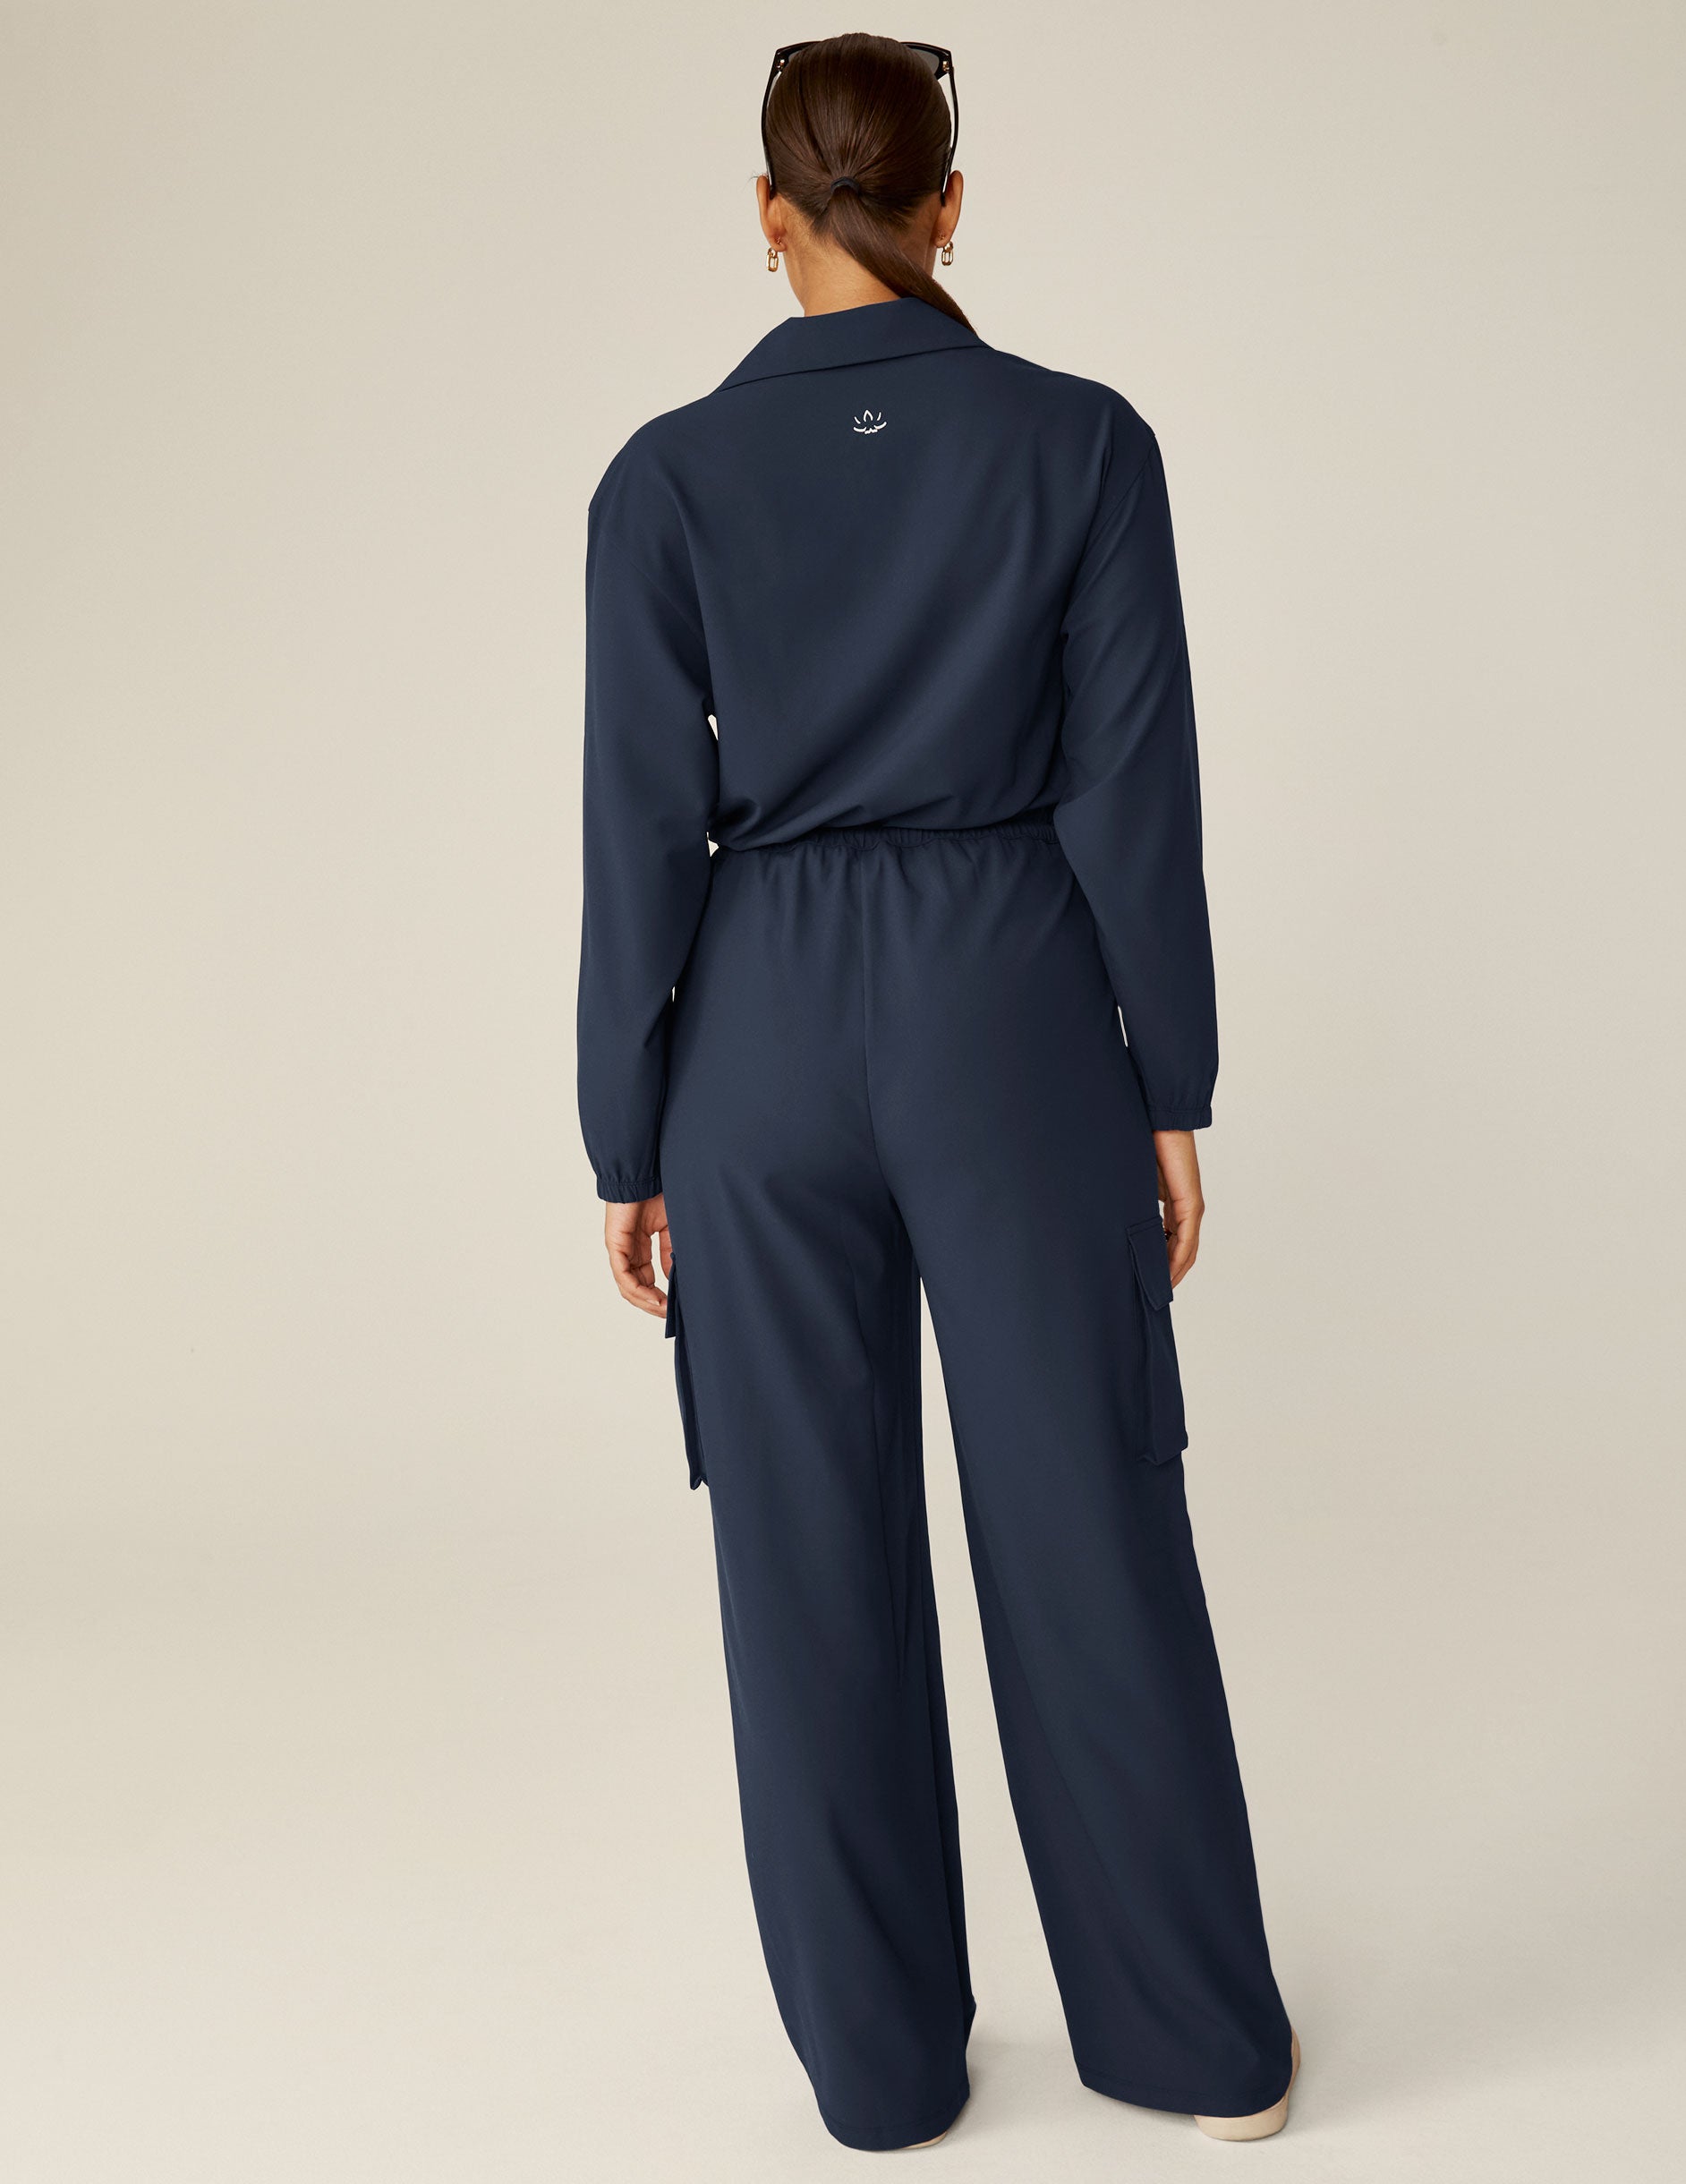 Update more than 227 navy blue long sleeve jumpsuit latest